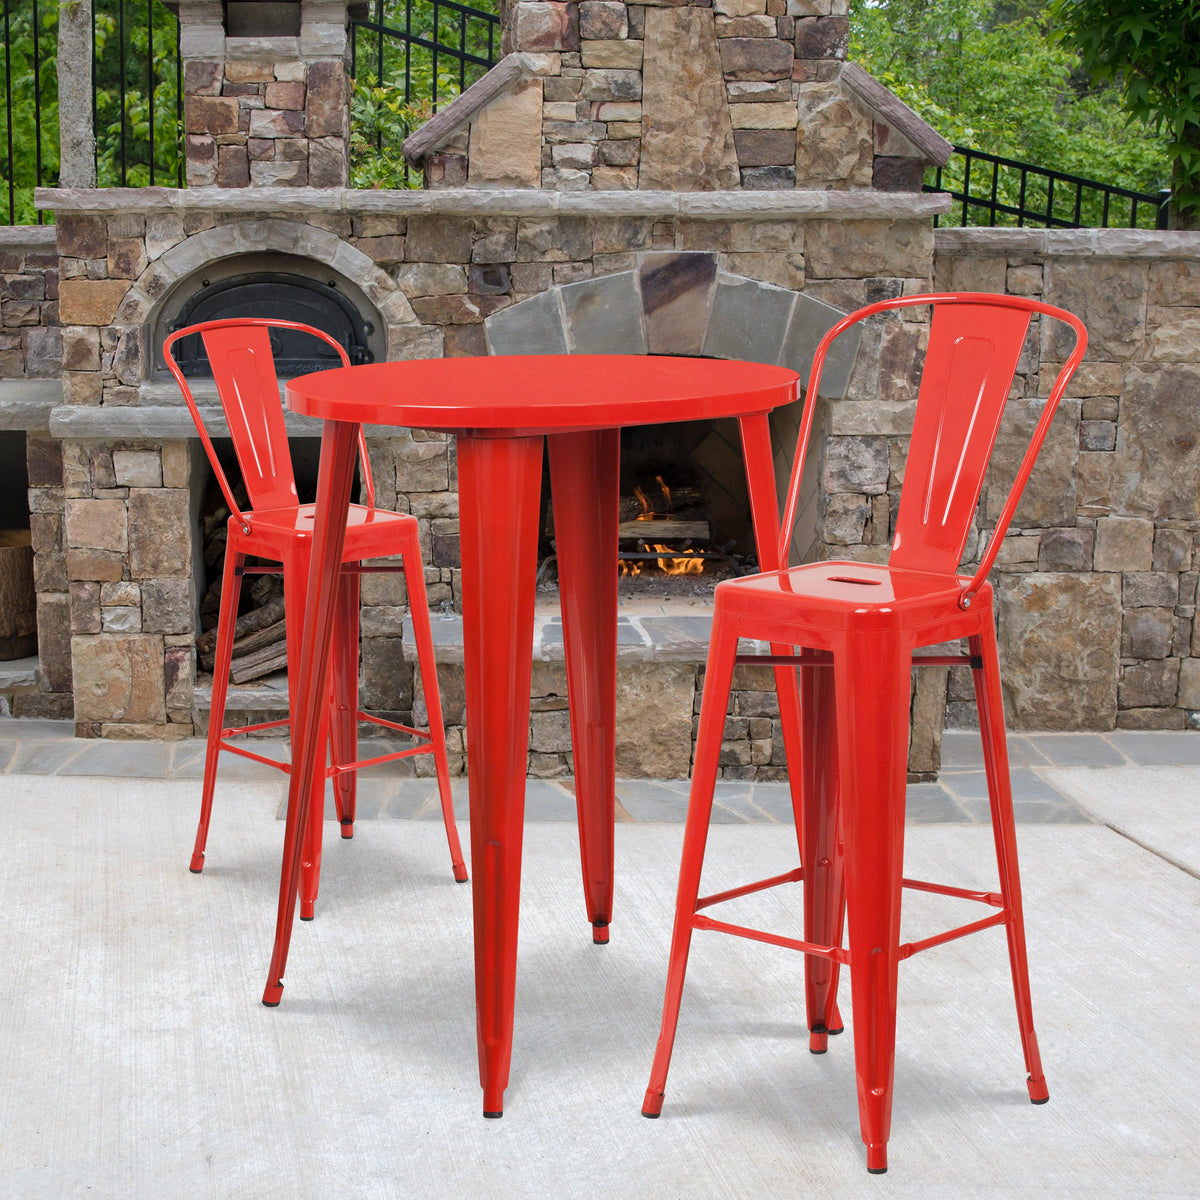 Red |#| 30inch Round Red Metal Indoor-Outdoor Bar Table Set with 2 Cafe Stools